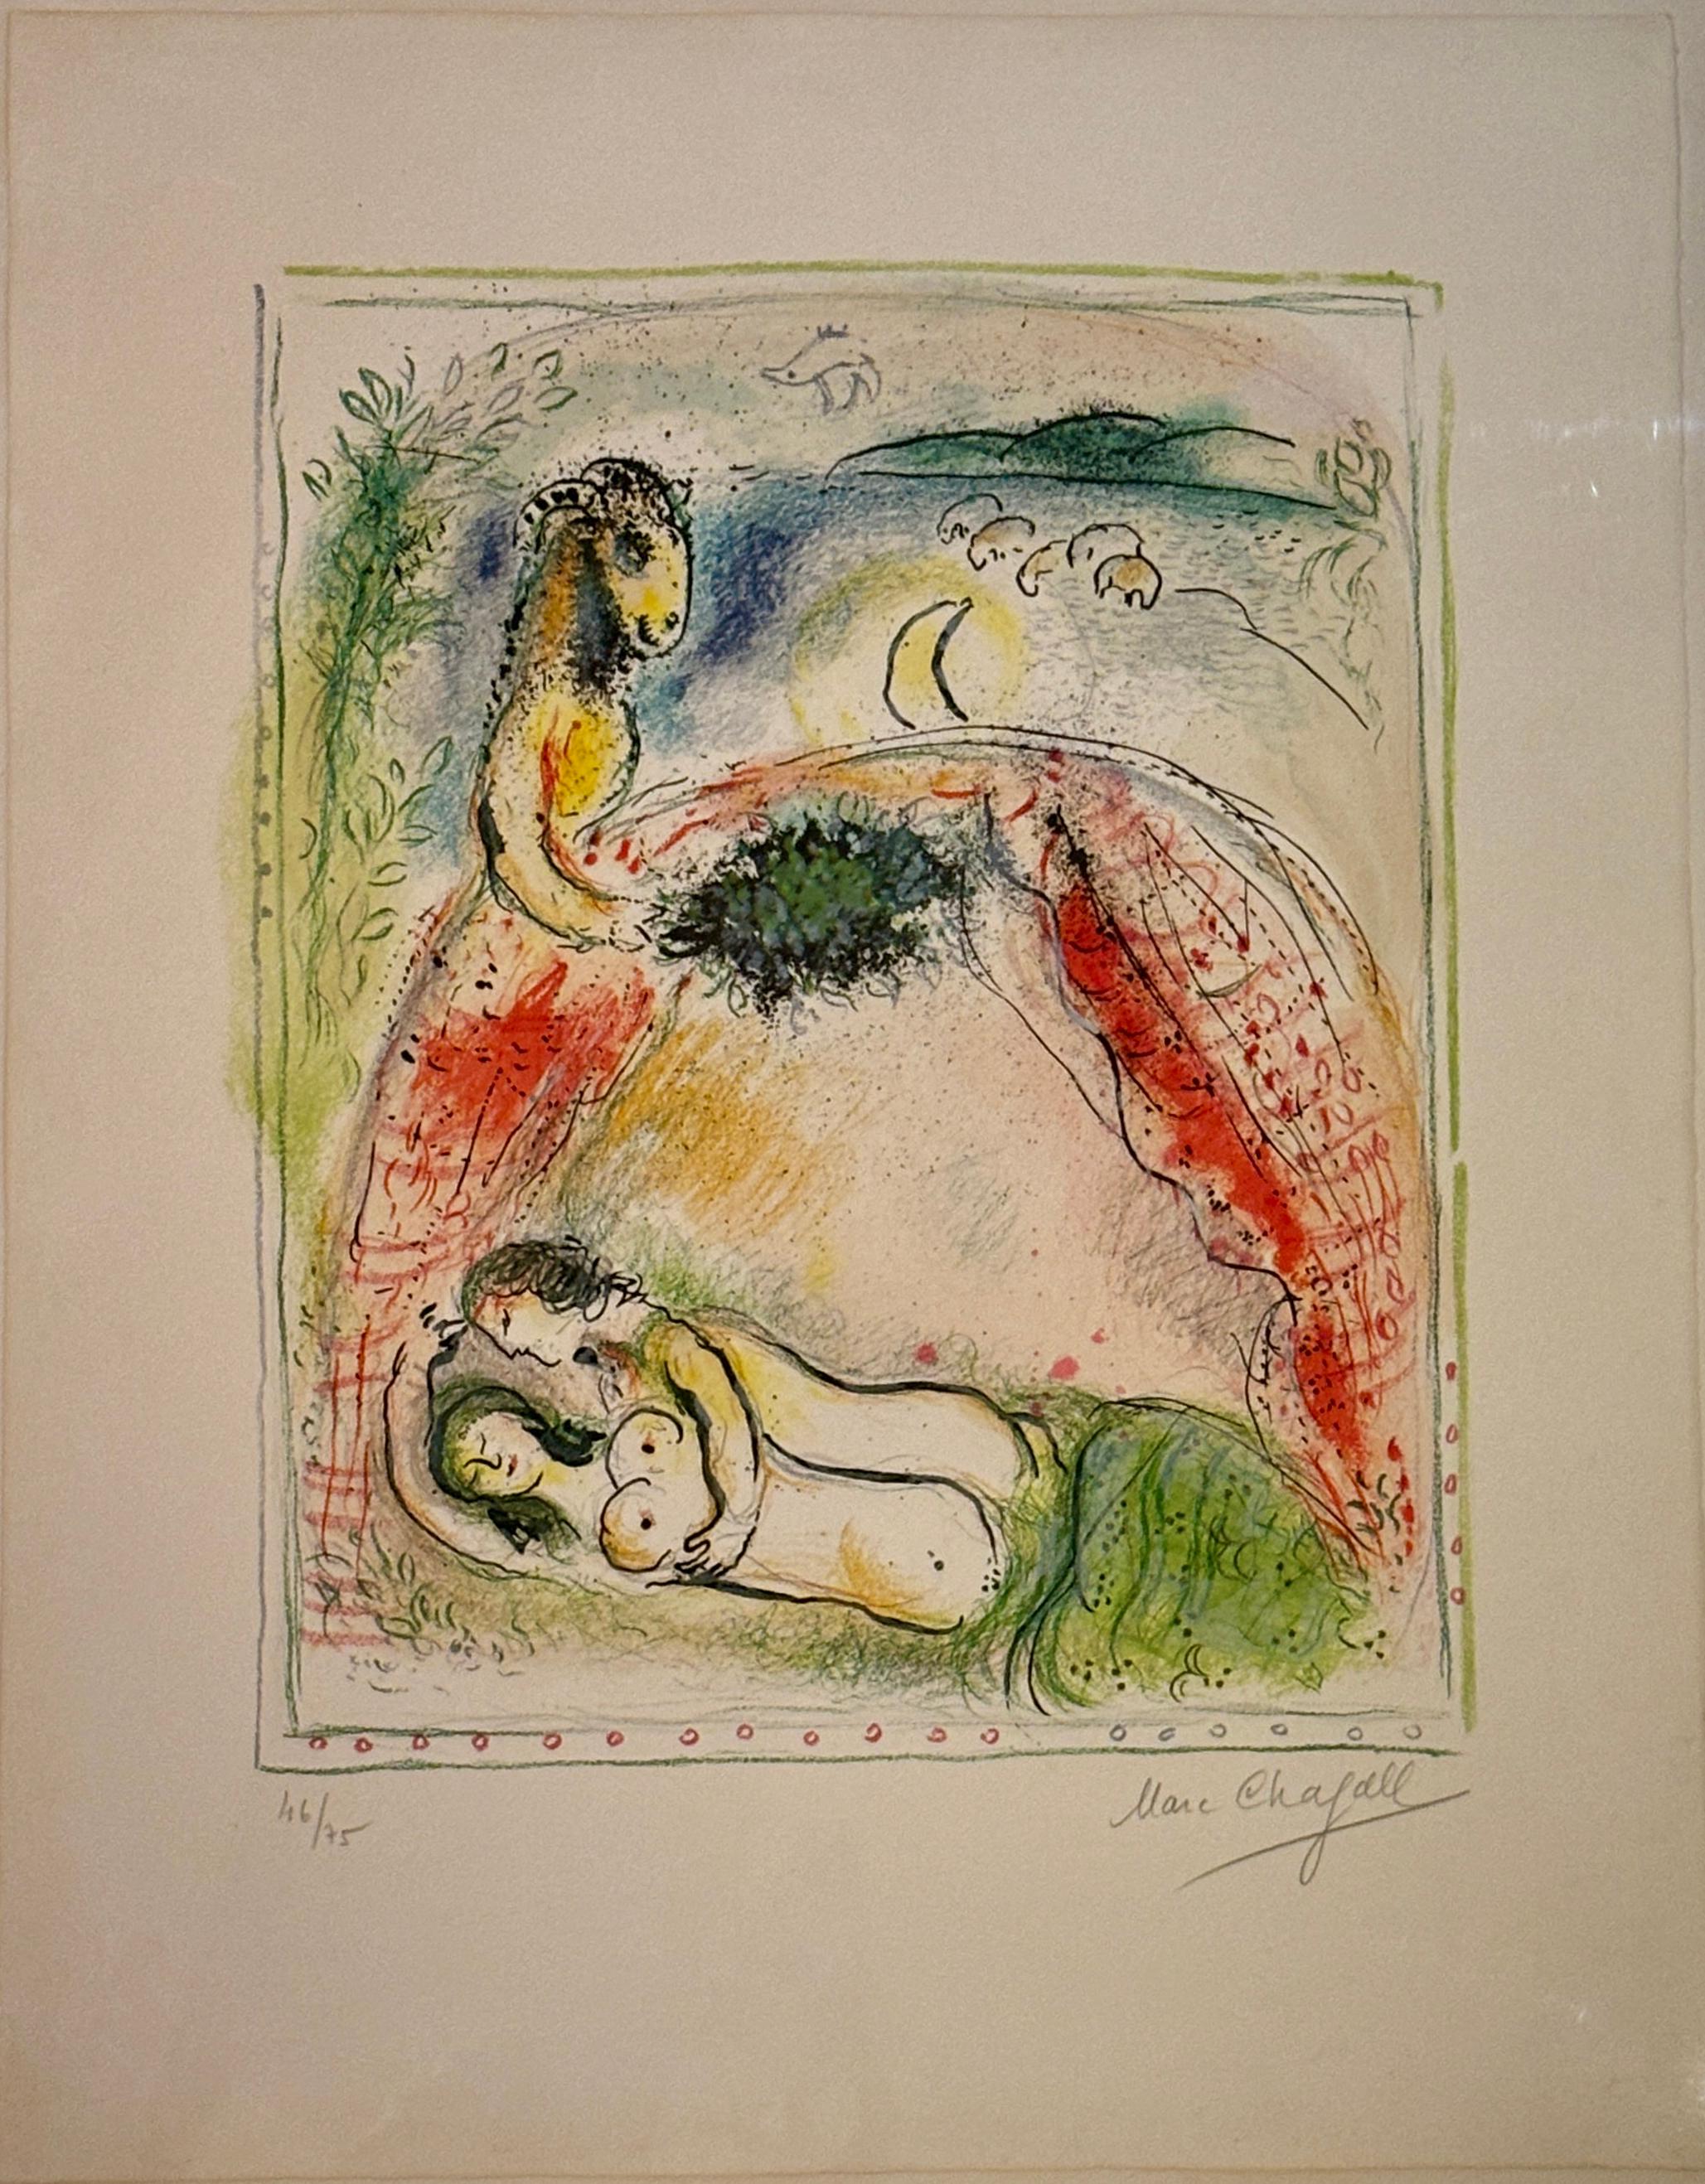 What materials did Marc Chagall use?